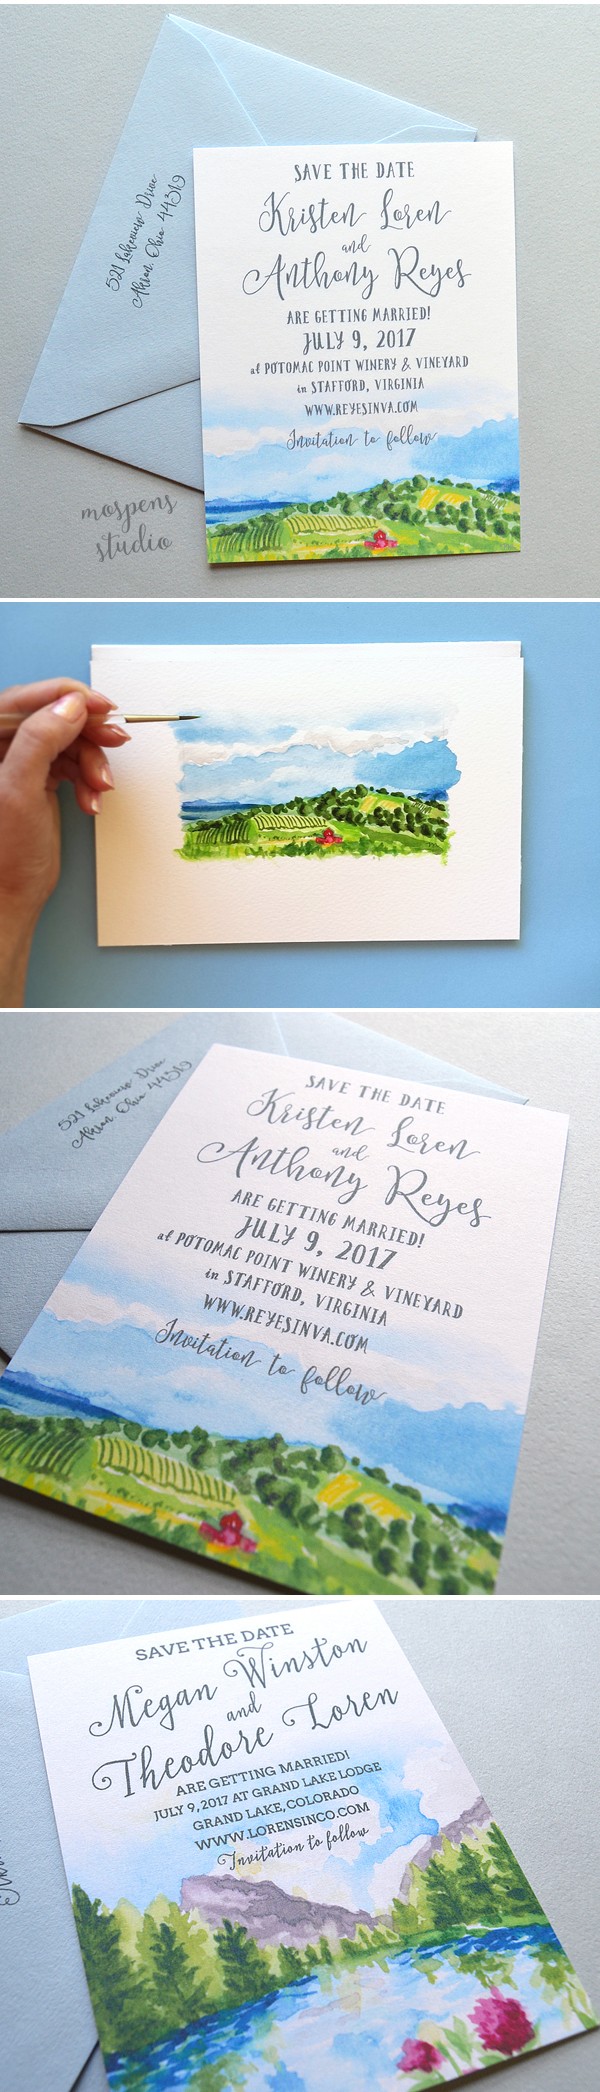 Send the scene! Landscape Save The Date Cards complete with 100% original hand painted watercolor art by Michelle Mospens. Perfect for a rustic and vineyard wedding!! - www.mospensstudio.com